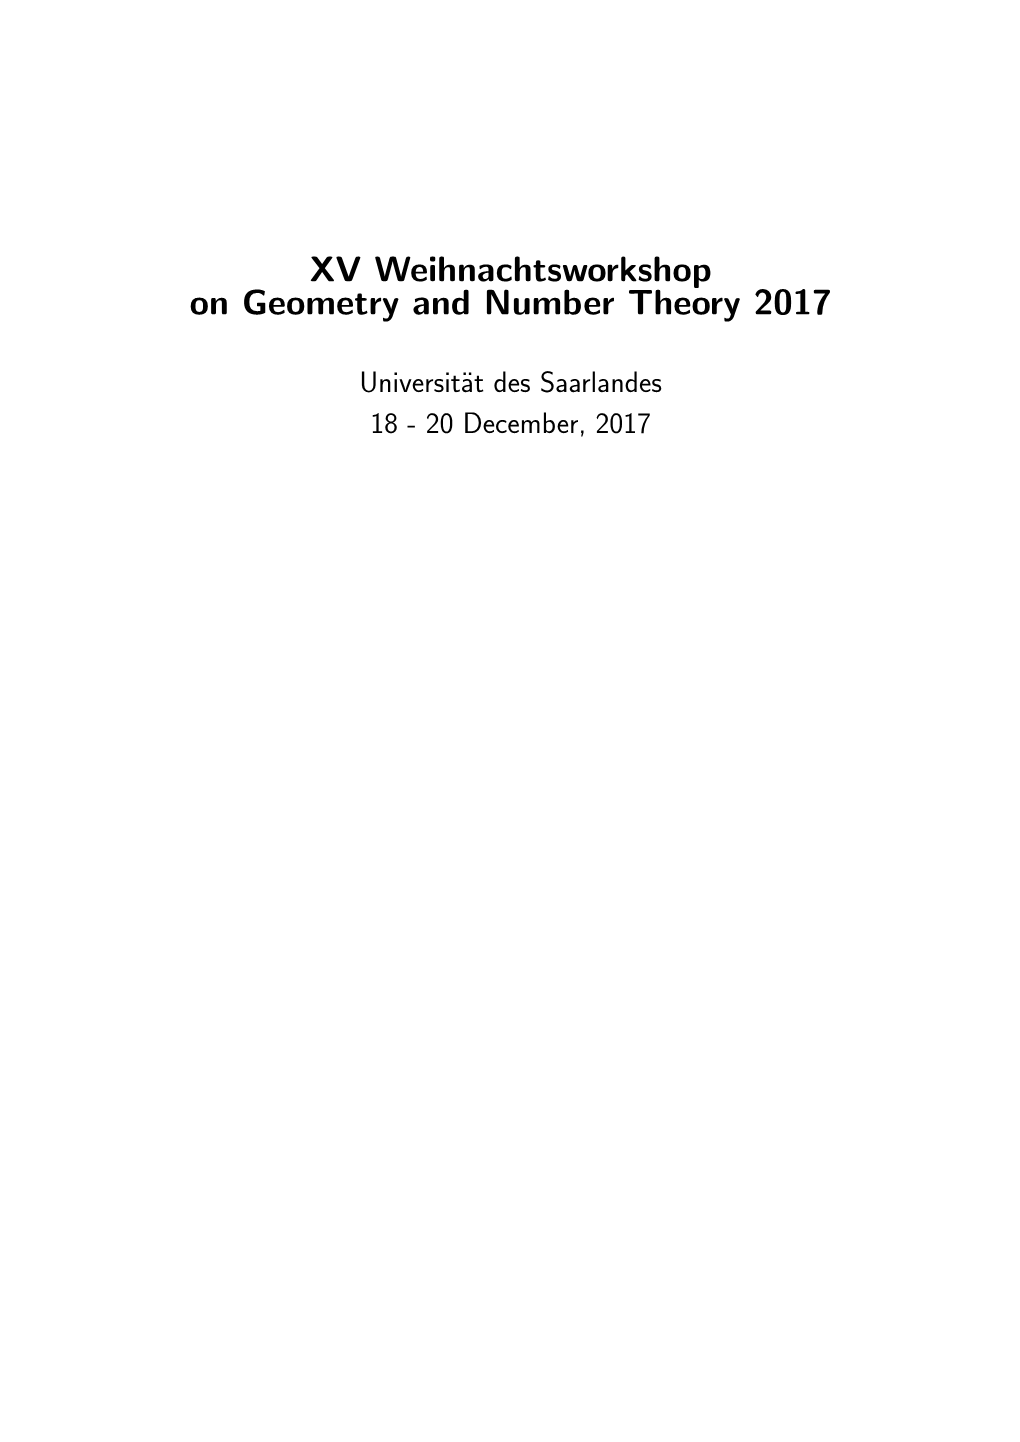 XV Weihnachtsworkshop on Geometry and Number Theory 2017